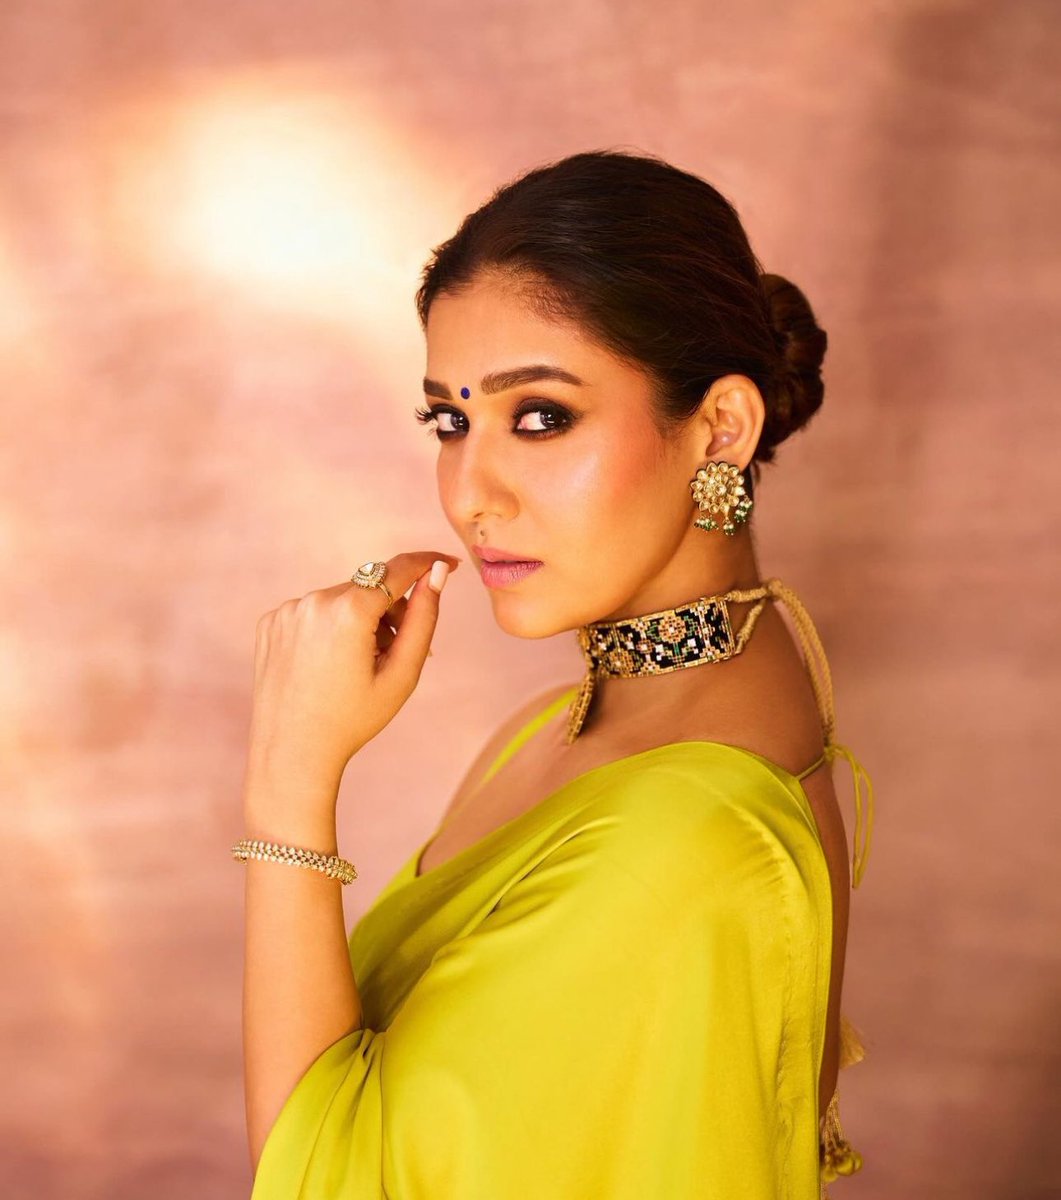 I love how every move of Nayan is tracked, analysed, dissected and criticised. That’s an impact where very few female stars receive. That’s the price you pay for dominating in a male dominated industry. Forever a proud fan of my boss lady.